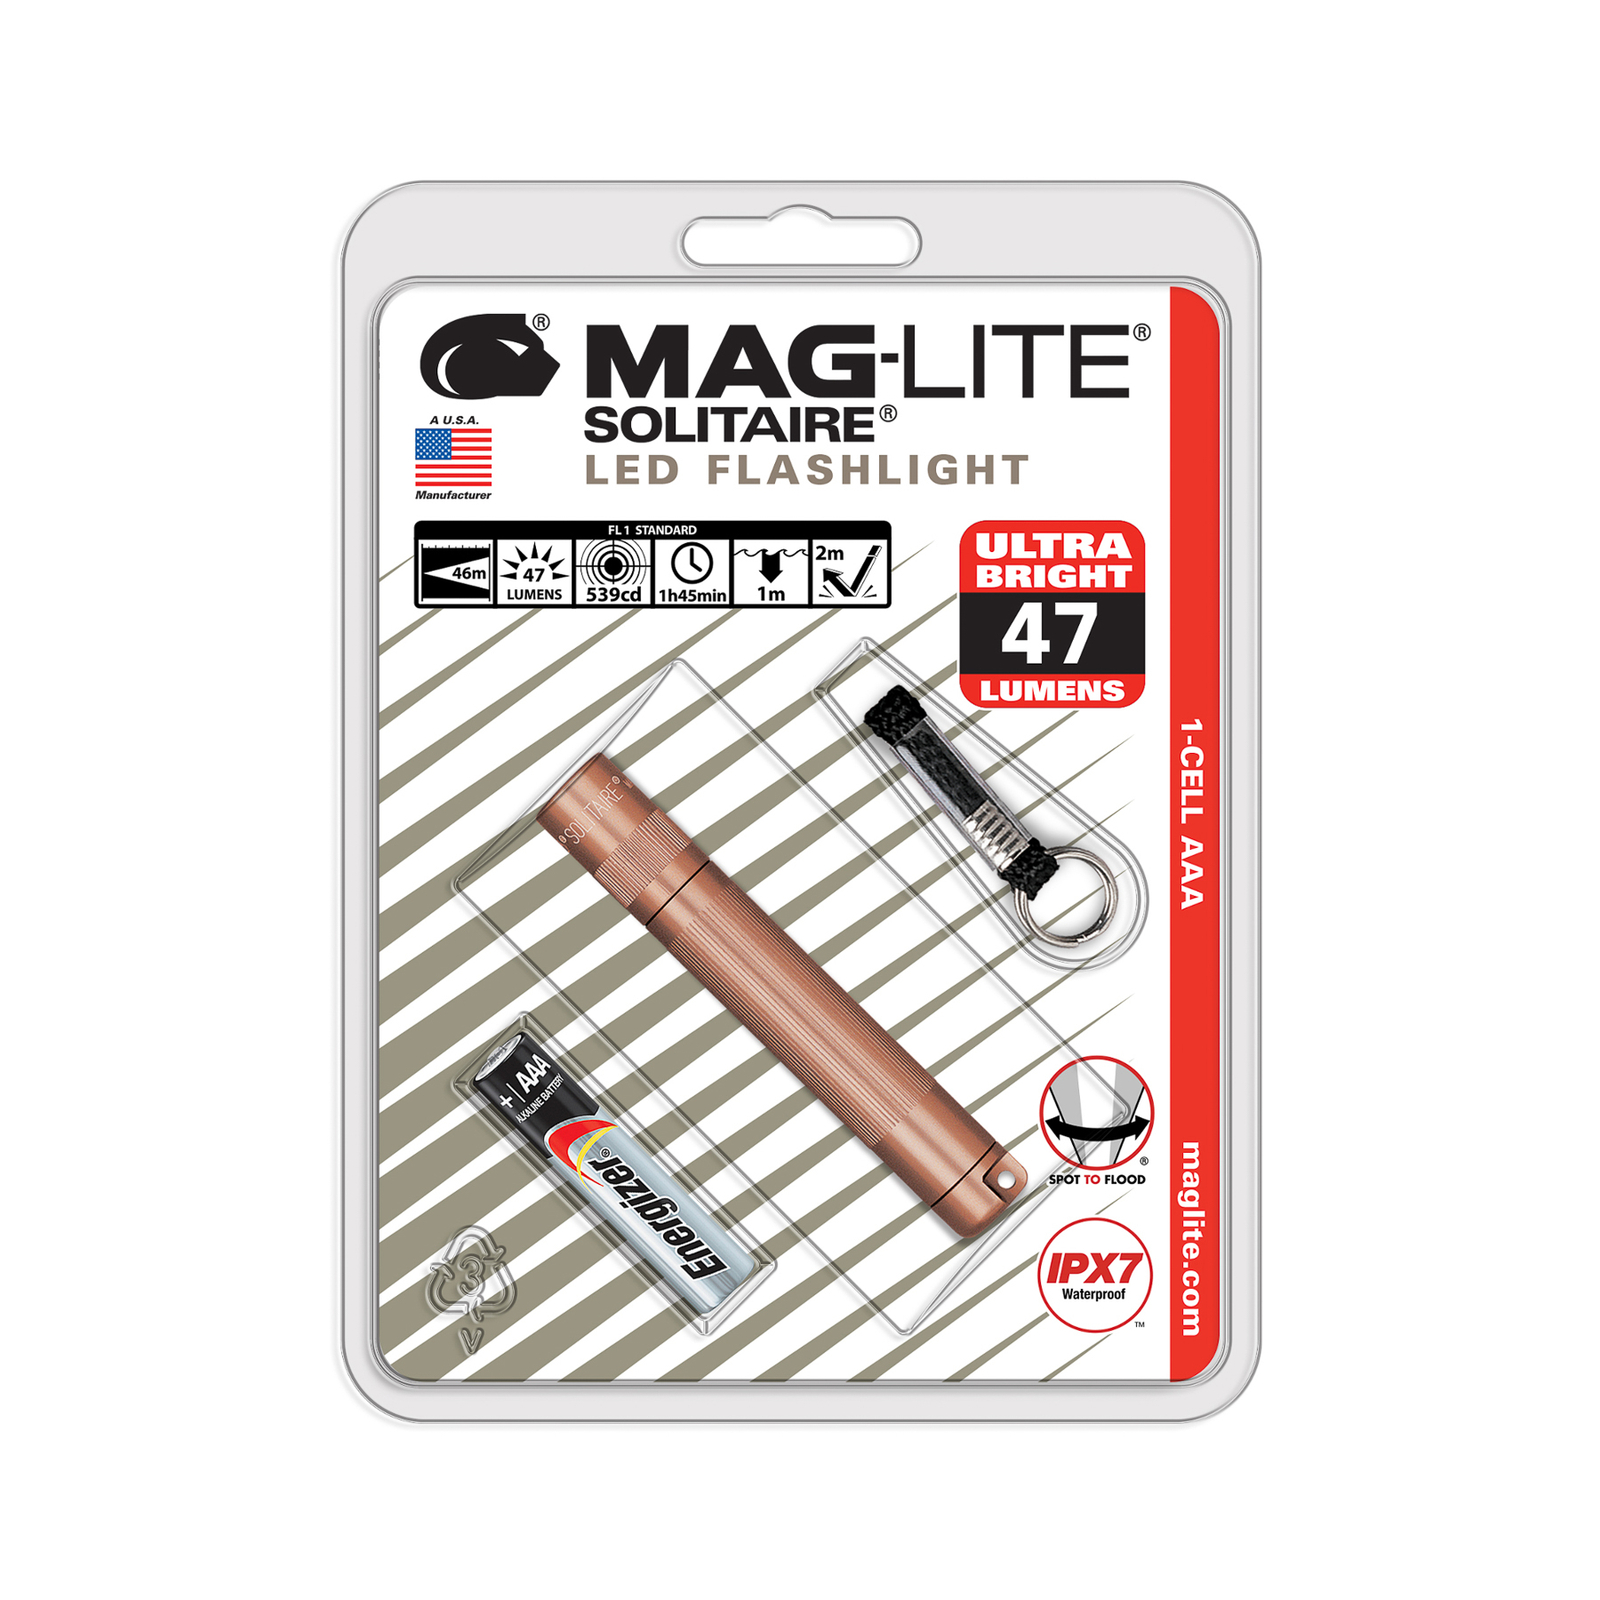 Maglite Linterna LED Solitaire, 1 Cell AAA, rosé